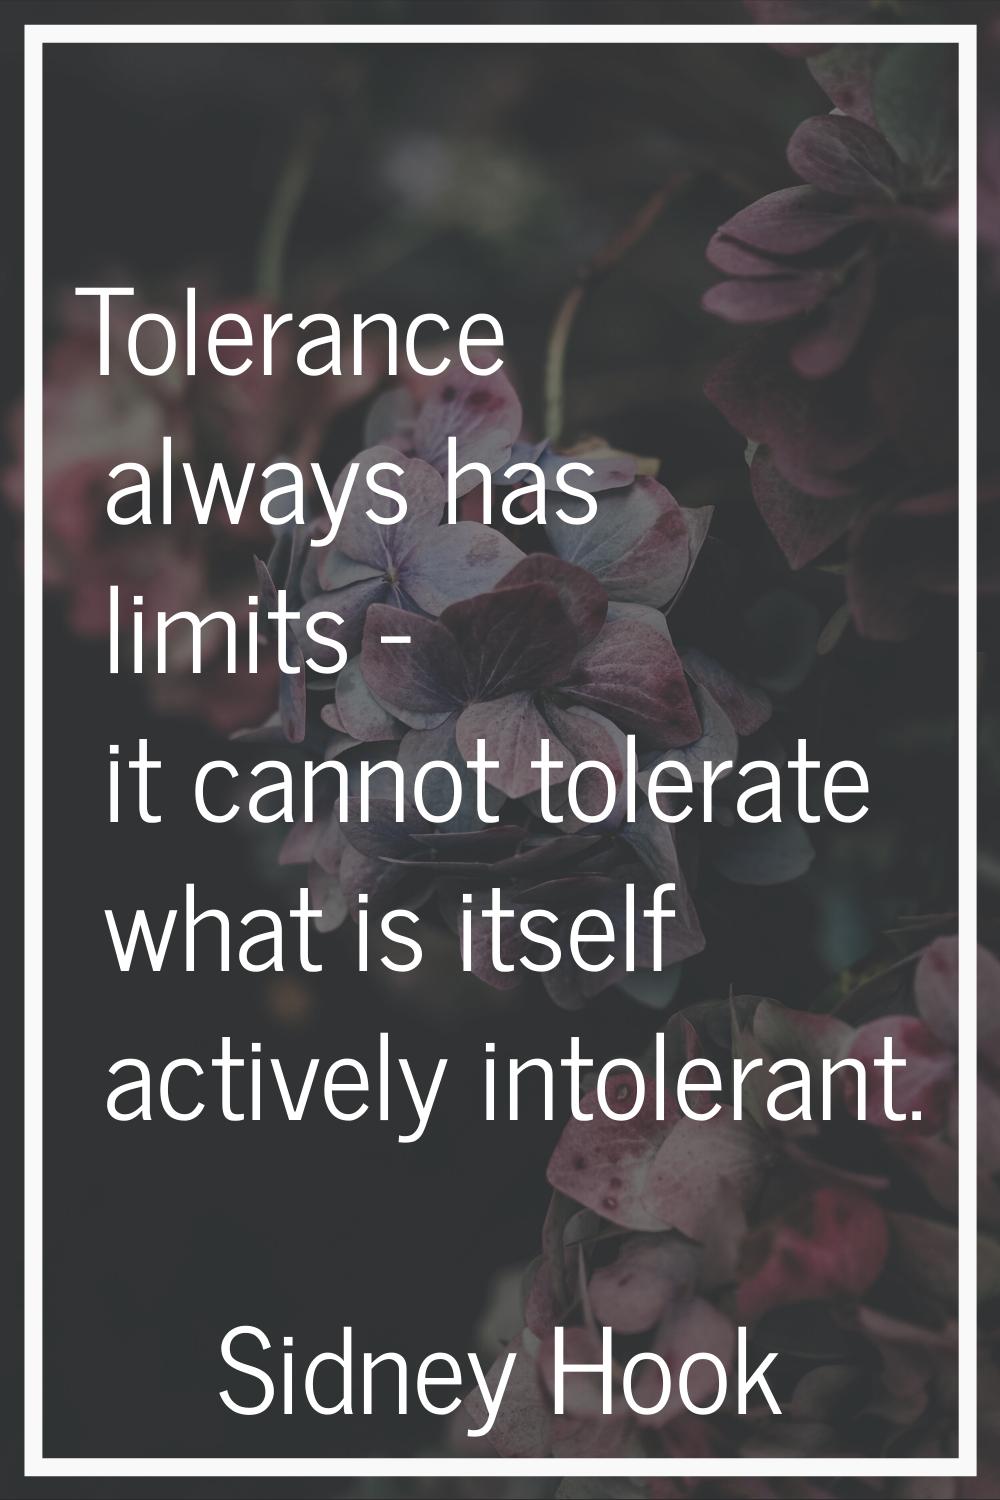 Tolerance always has limits - it cannot tolerate what is itself actively intolerant.